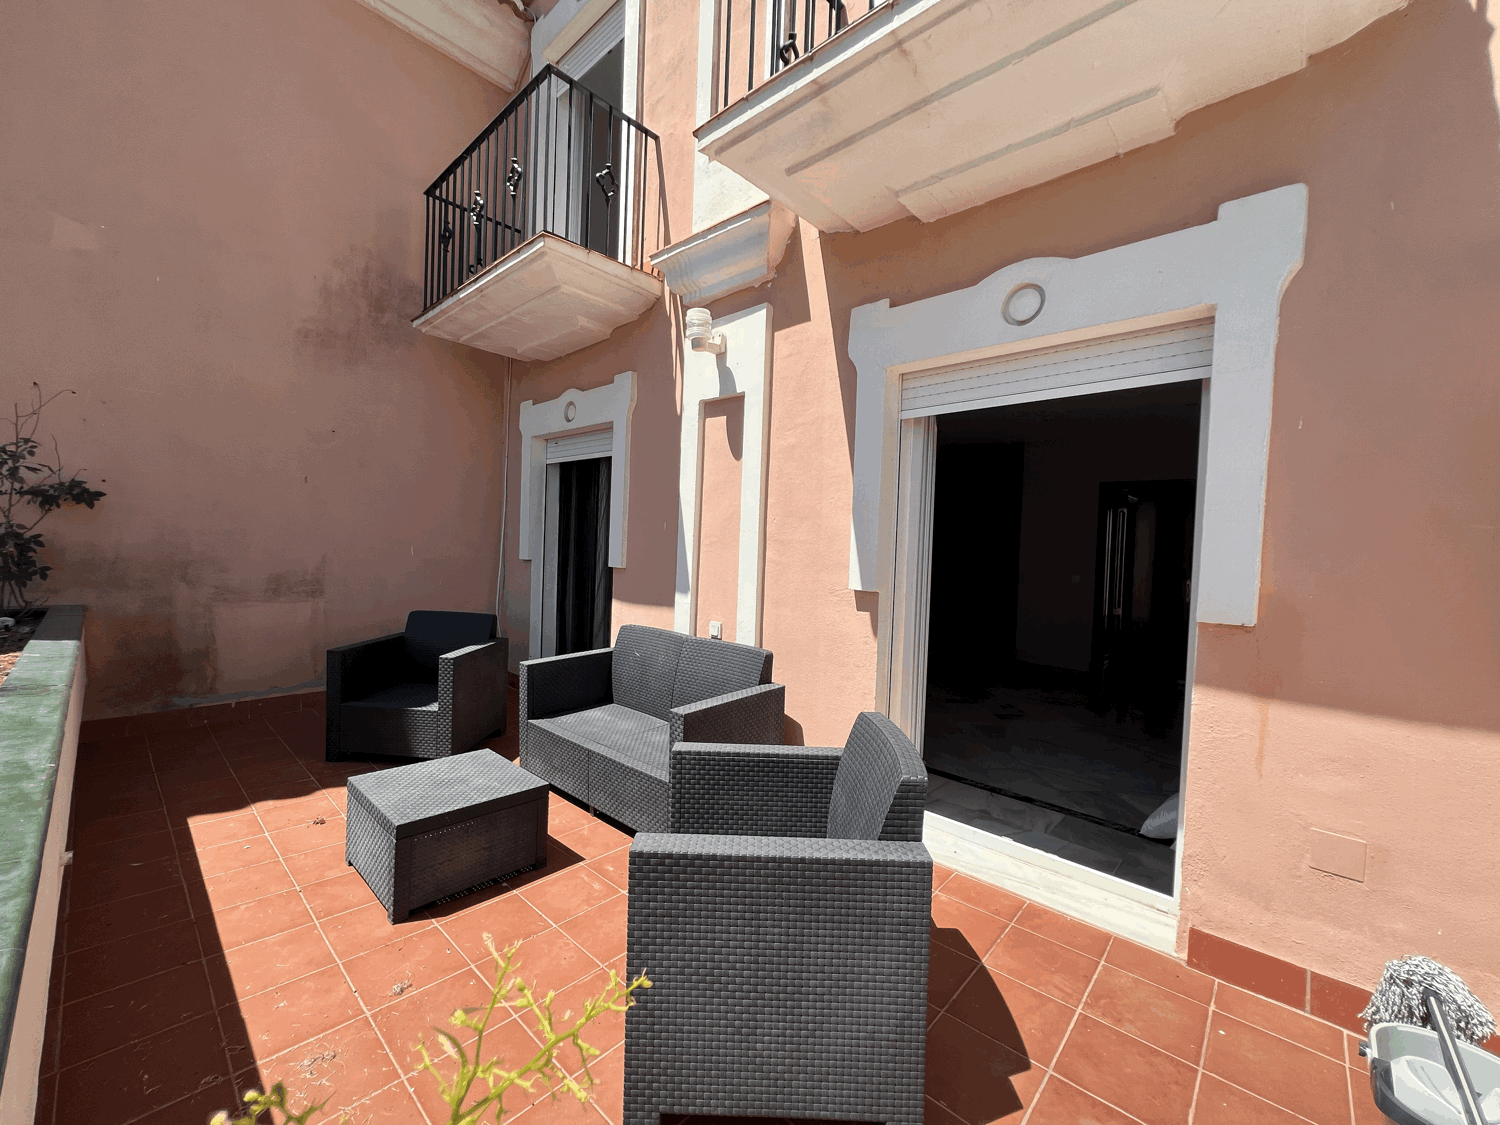 Three-bedroom semi-detached house a few meters from the beach